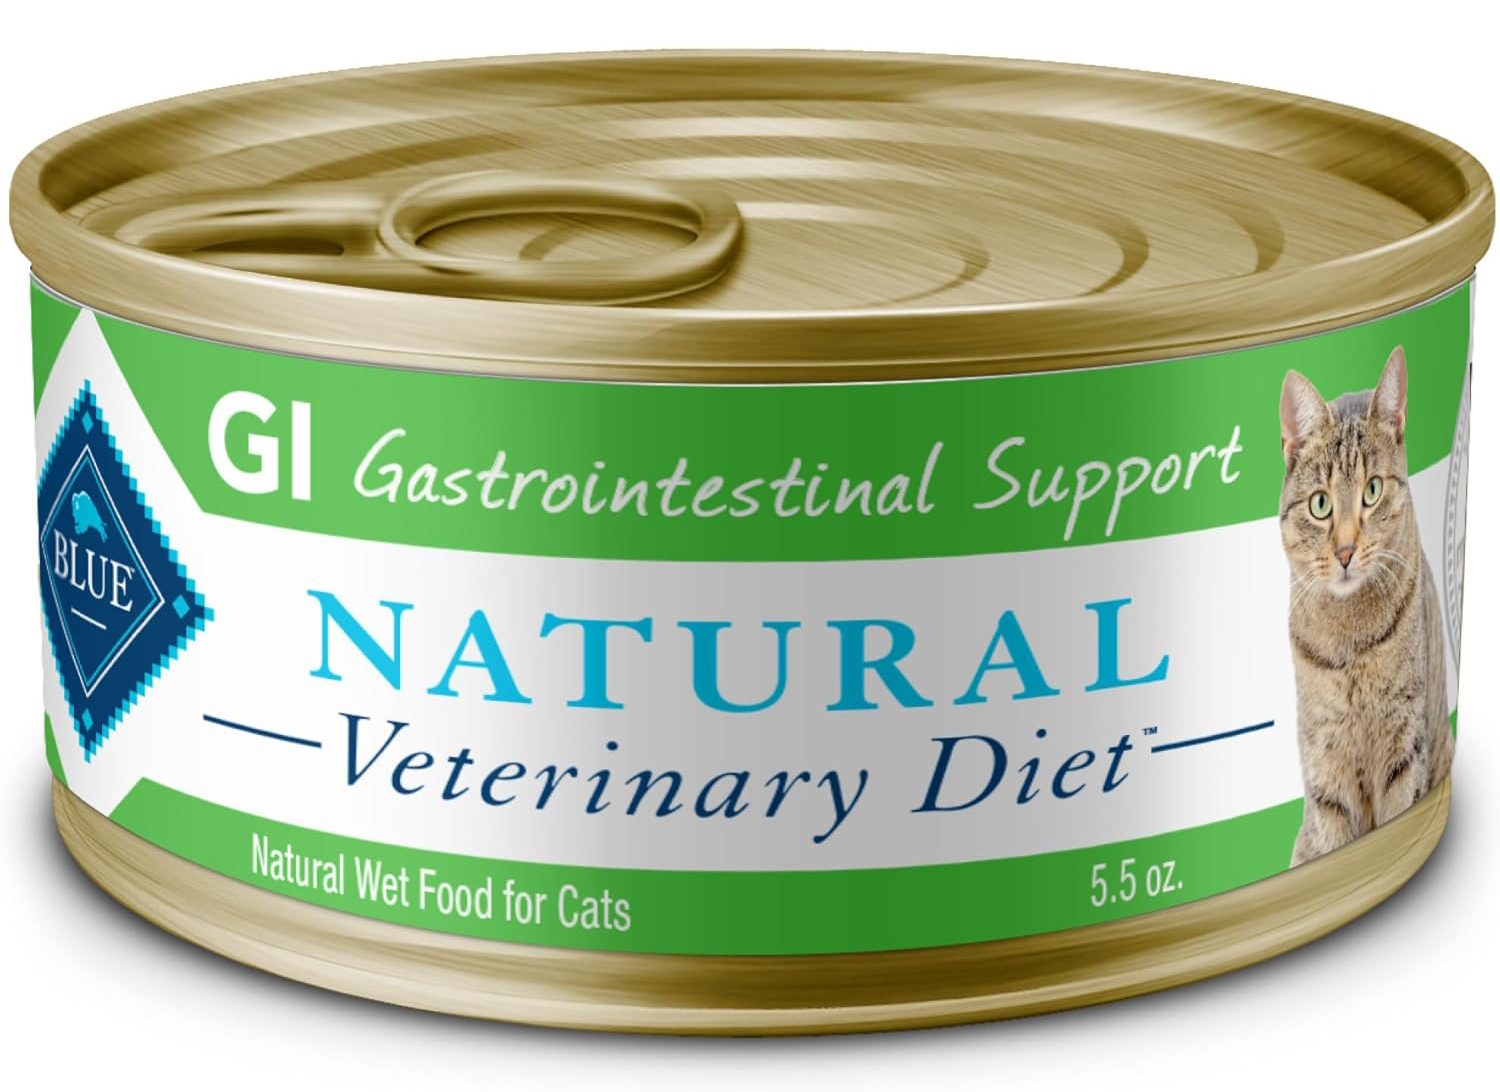 Blue Buffalo Natural Gastrointestinal Support Canned Cat Food